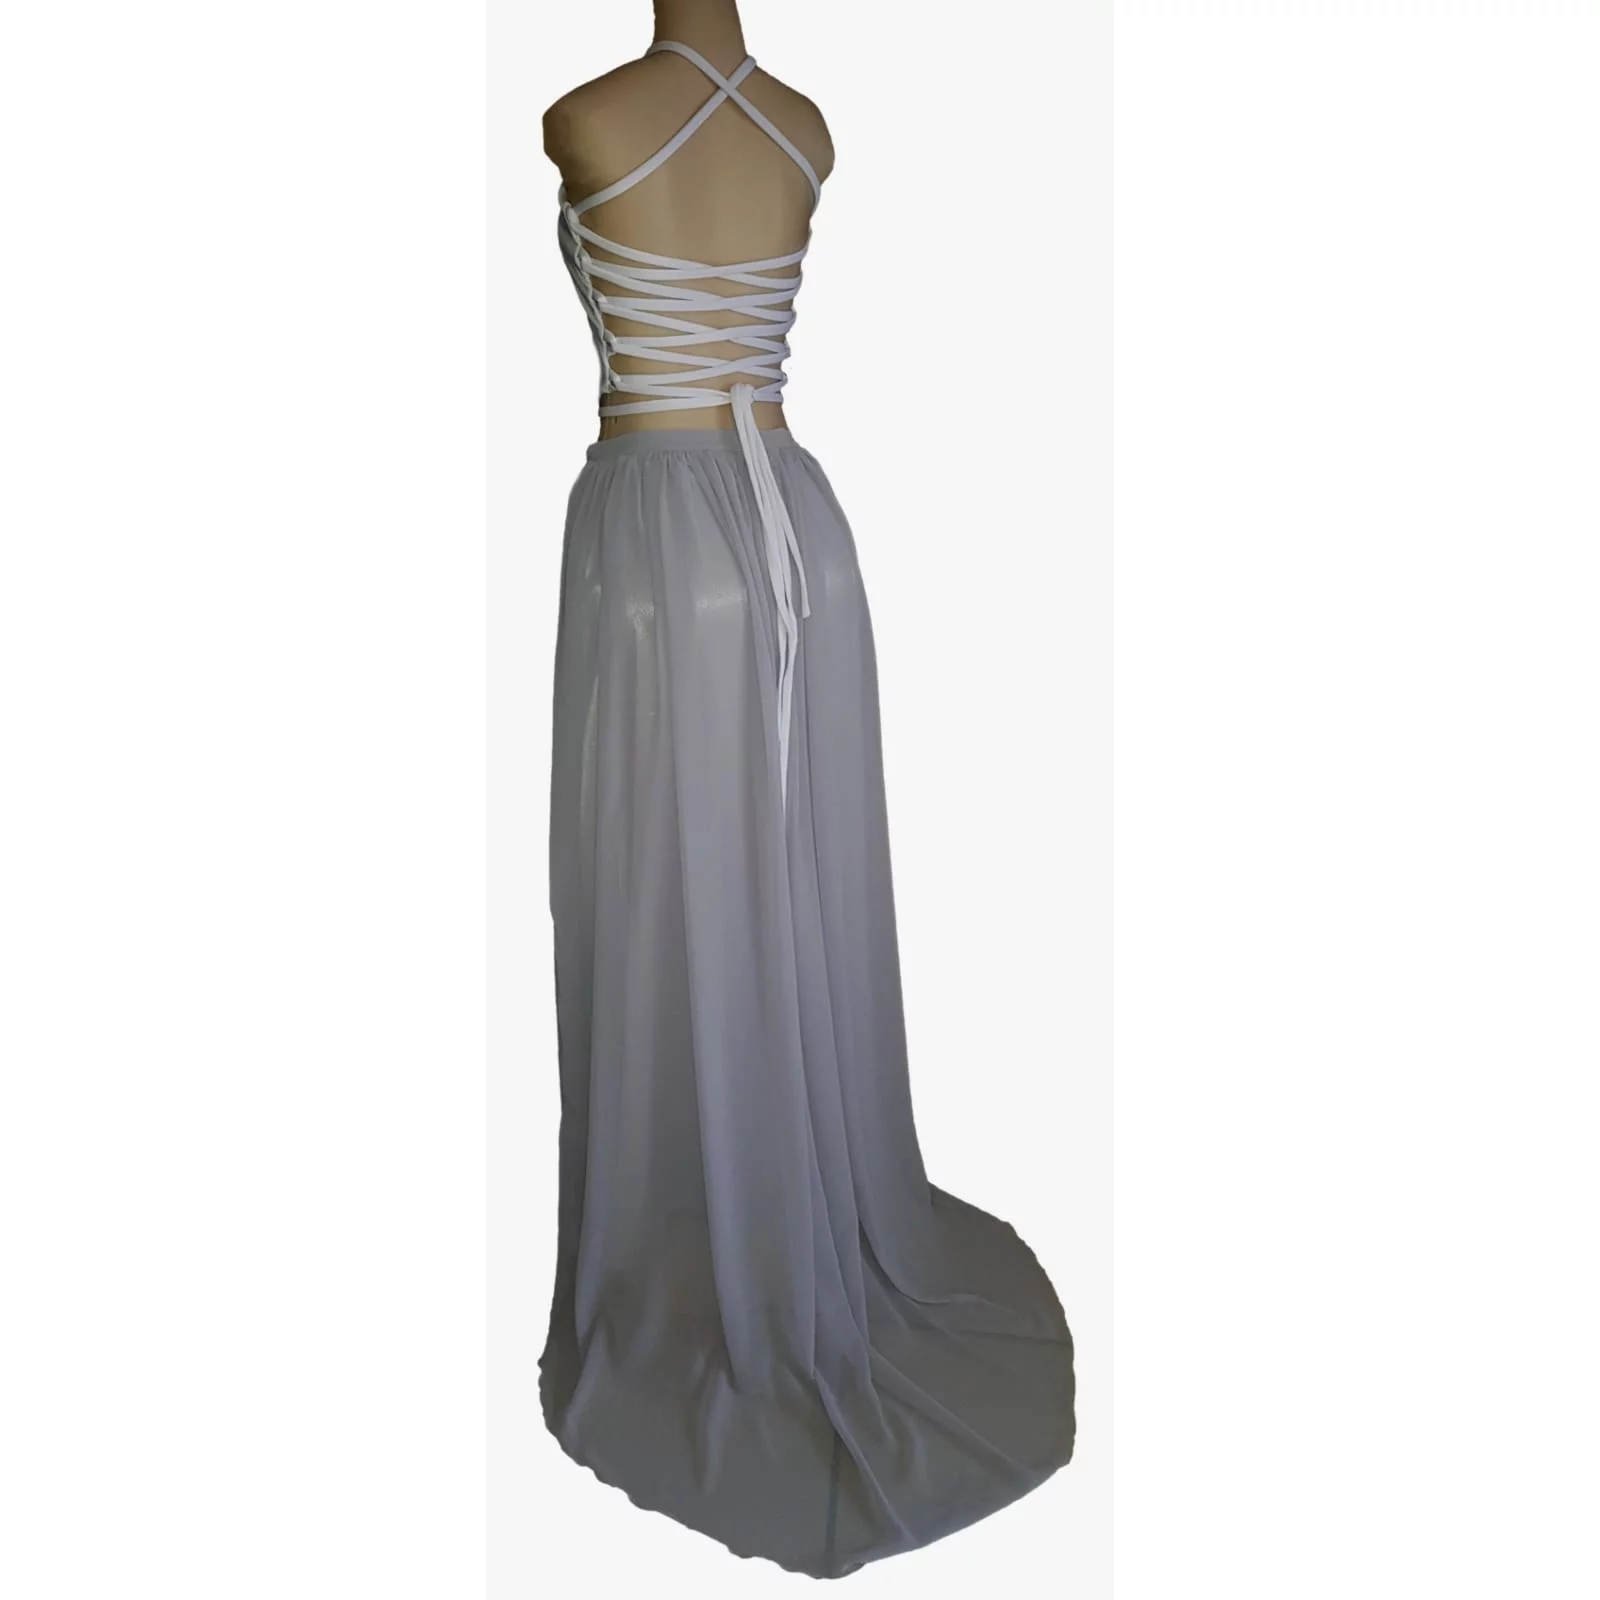 Grey and white 2 piece evening dress 5 grey and white 2 piece evening dress. Backless top lace-up detail, flowy chiffon skirt with a slit and a train.